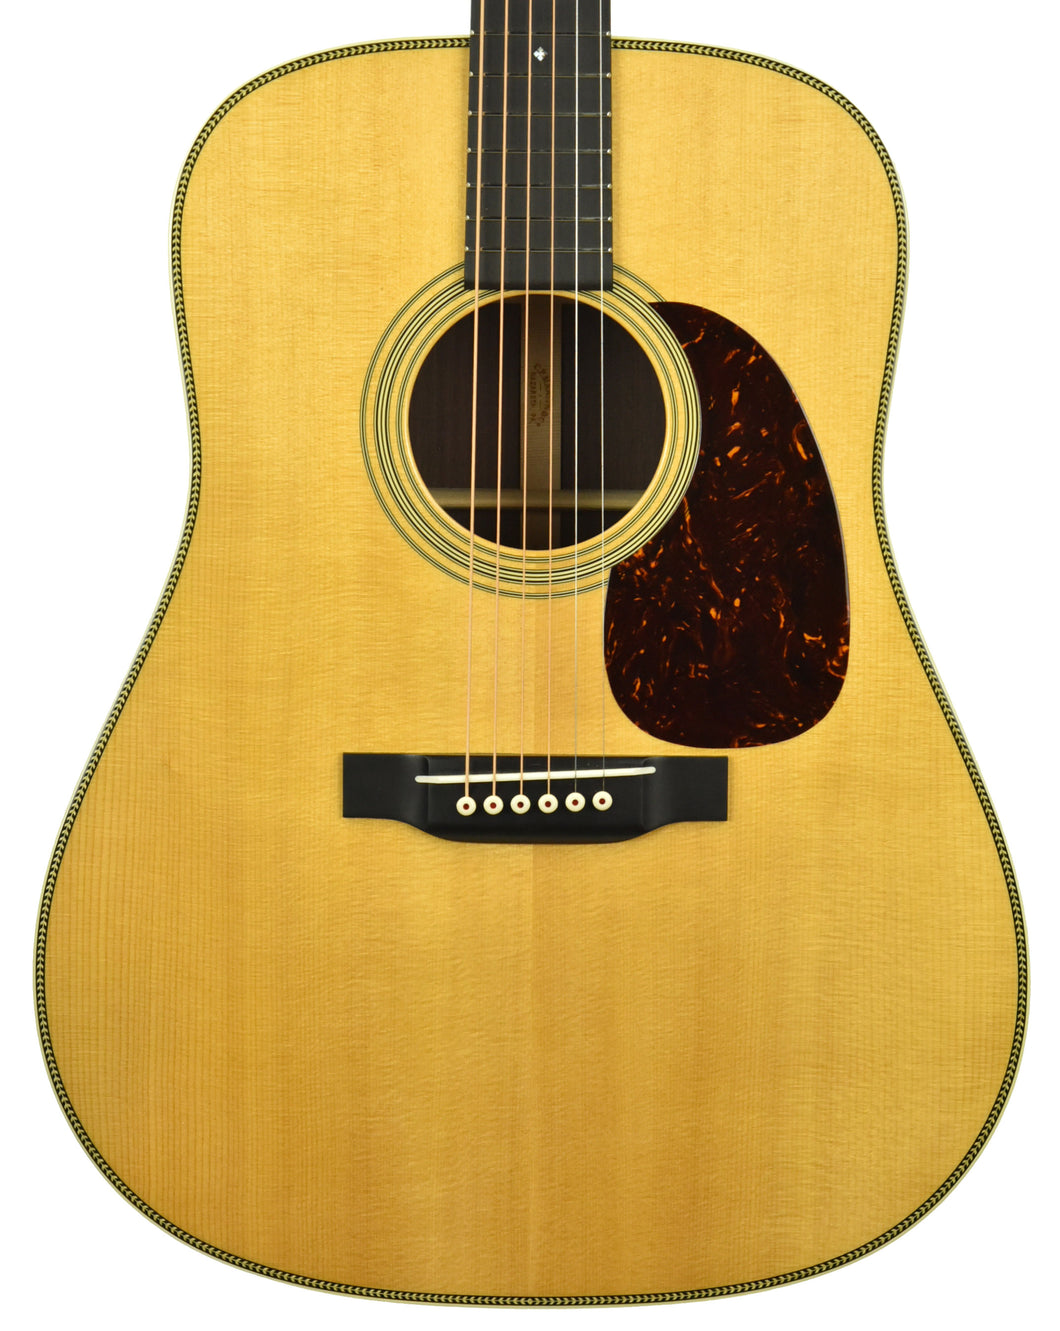 Used 2018 Martin HD-28V Vintage Series Acoustic Guitar in Natural 2201179 - The Music Gallery